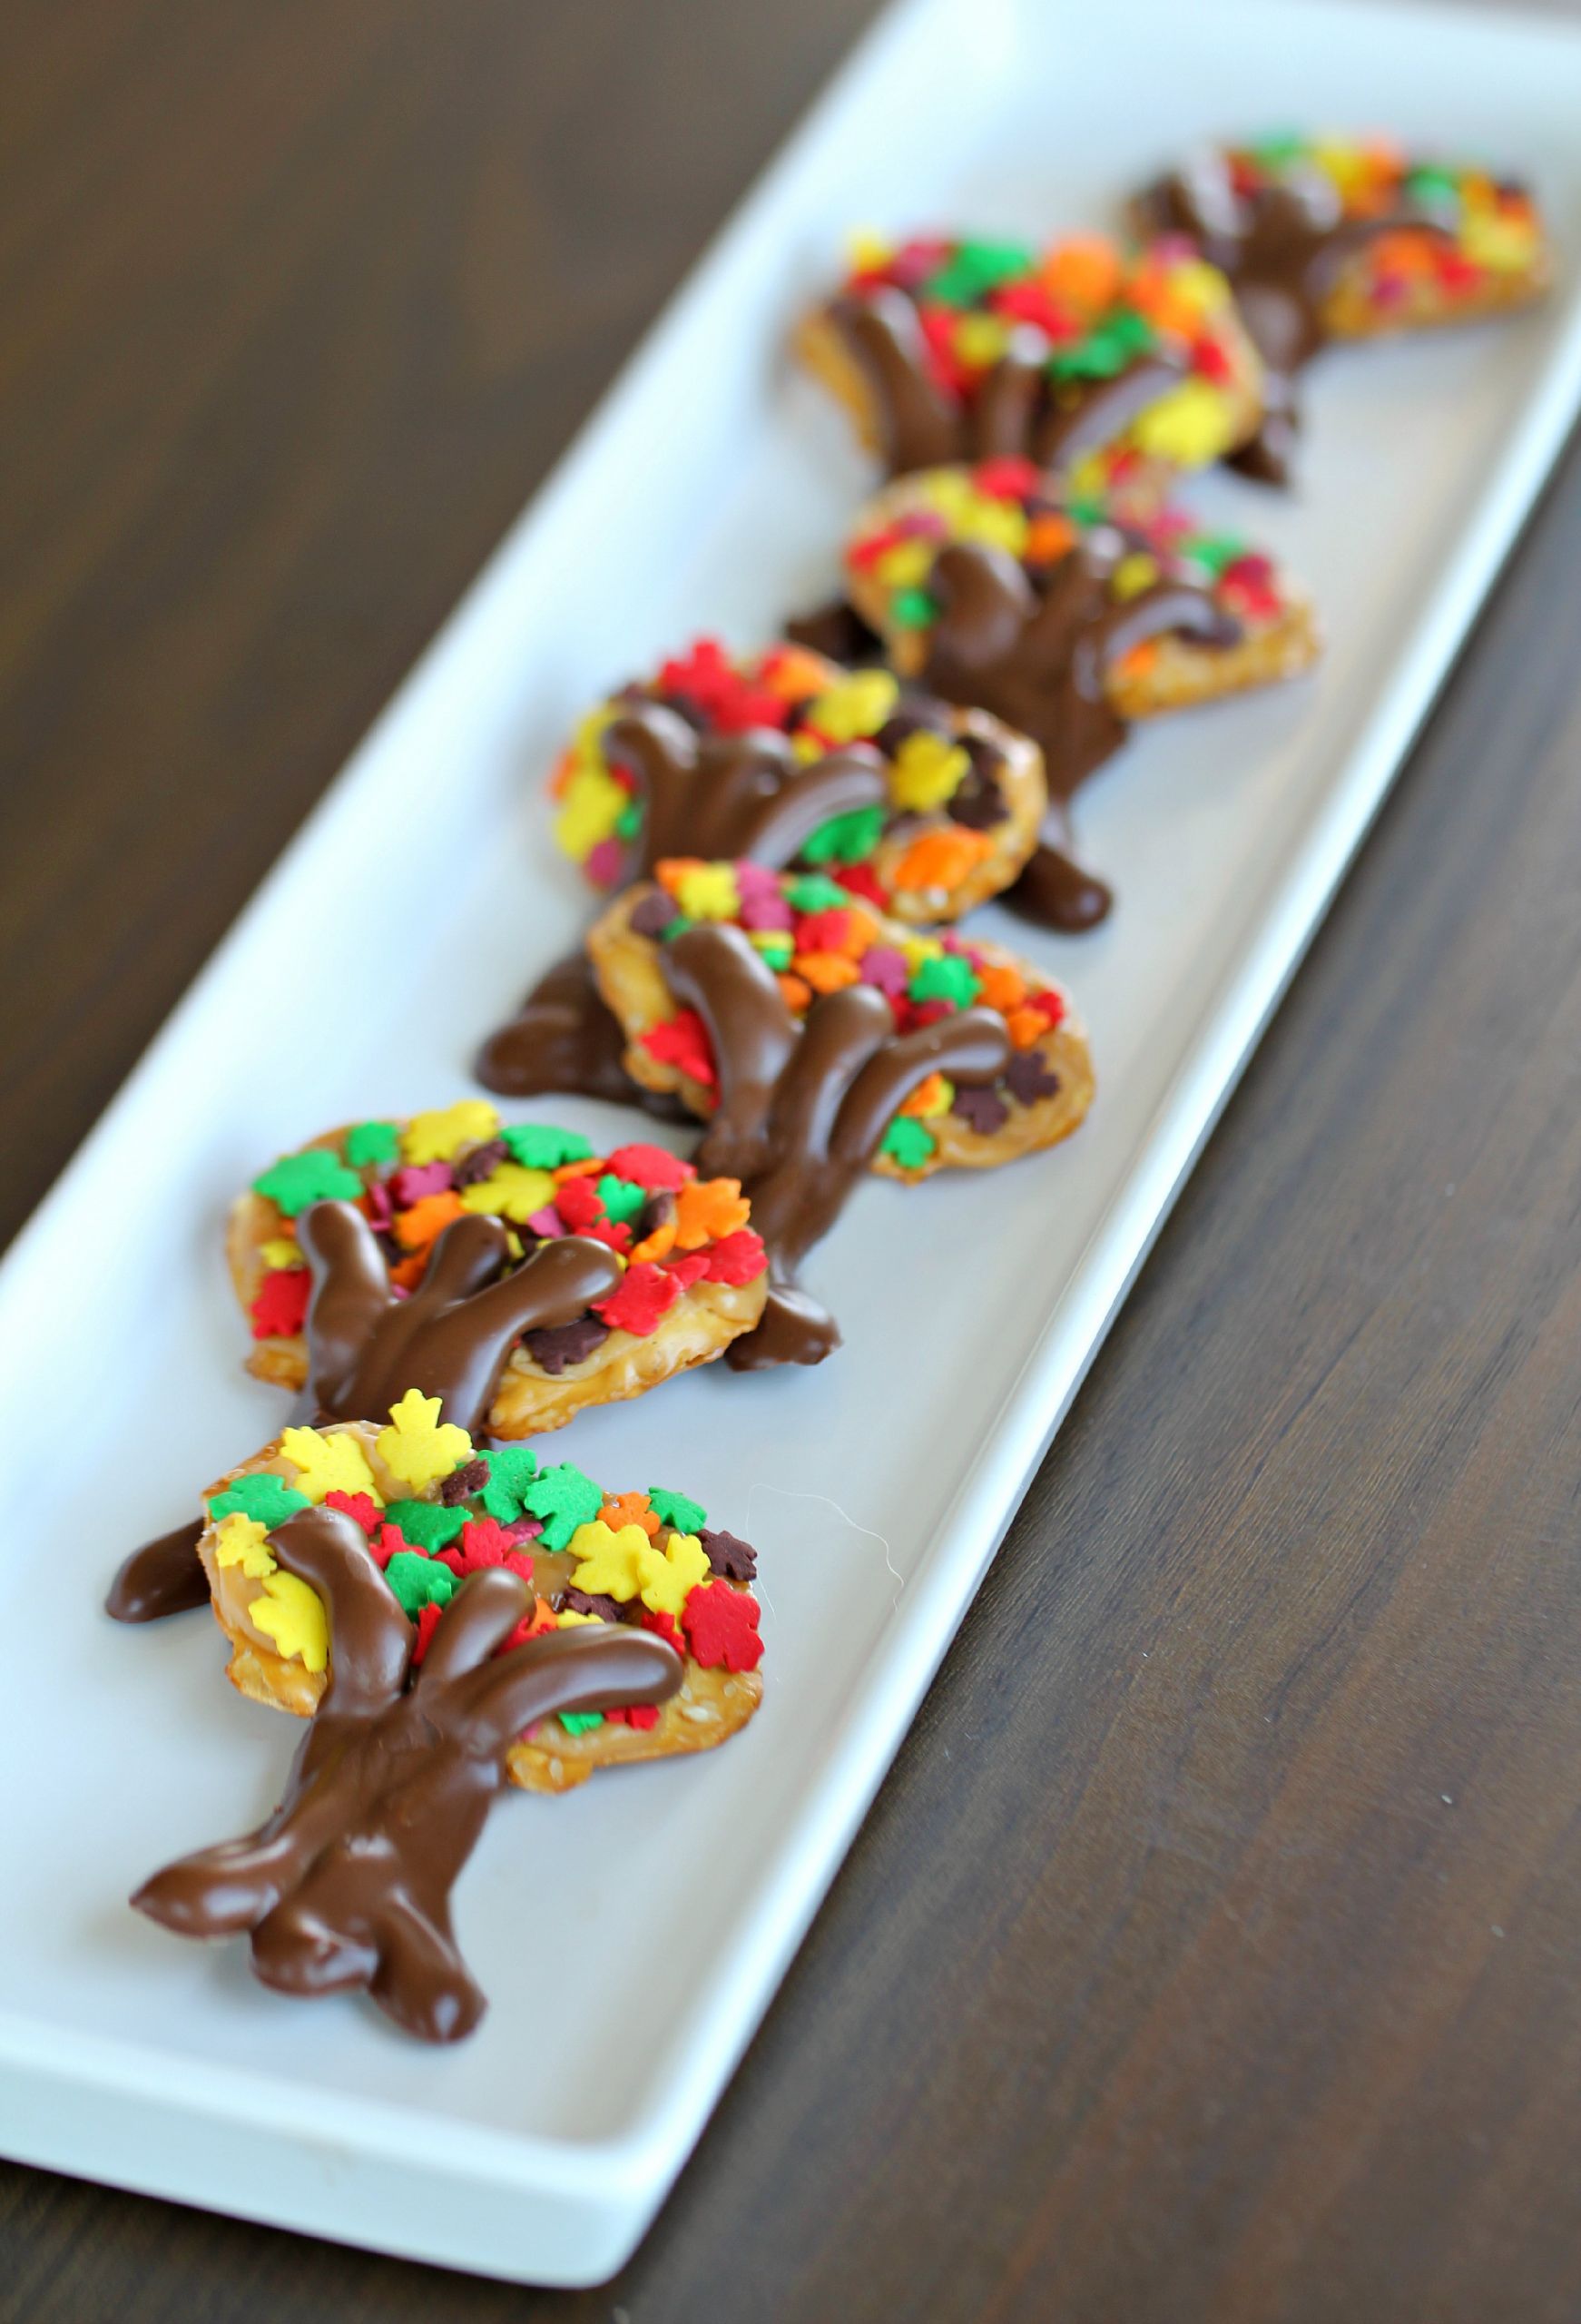 Fun Desserts to Make with Kids Elegant the 30 Best Ideas for Fall Desserts for Kids Best Round